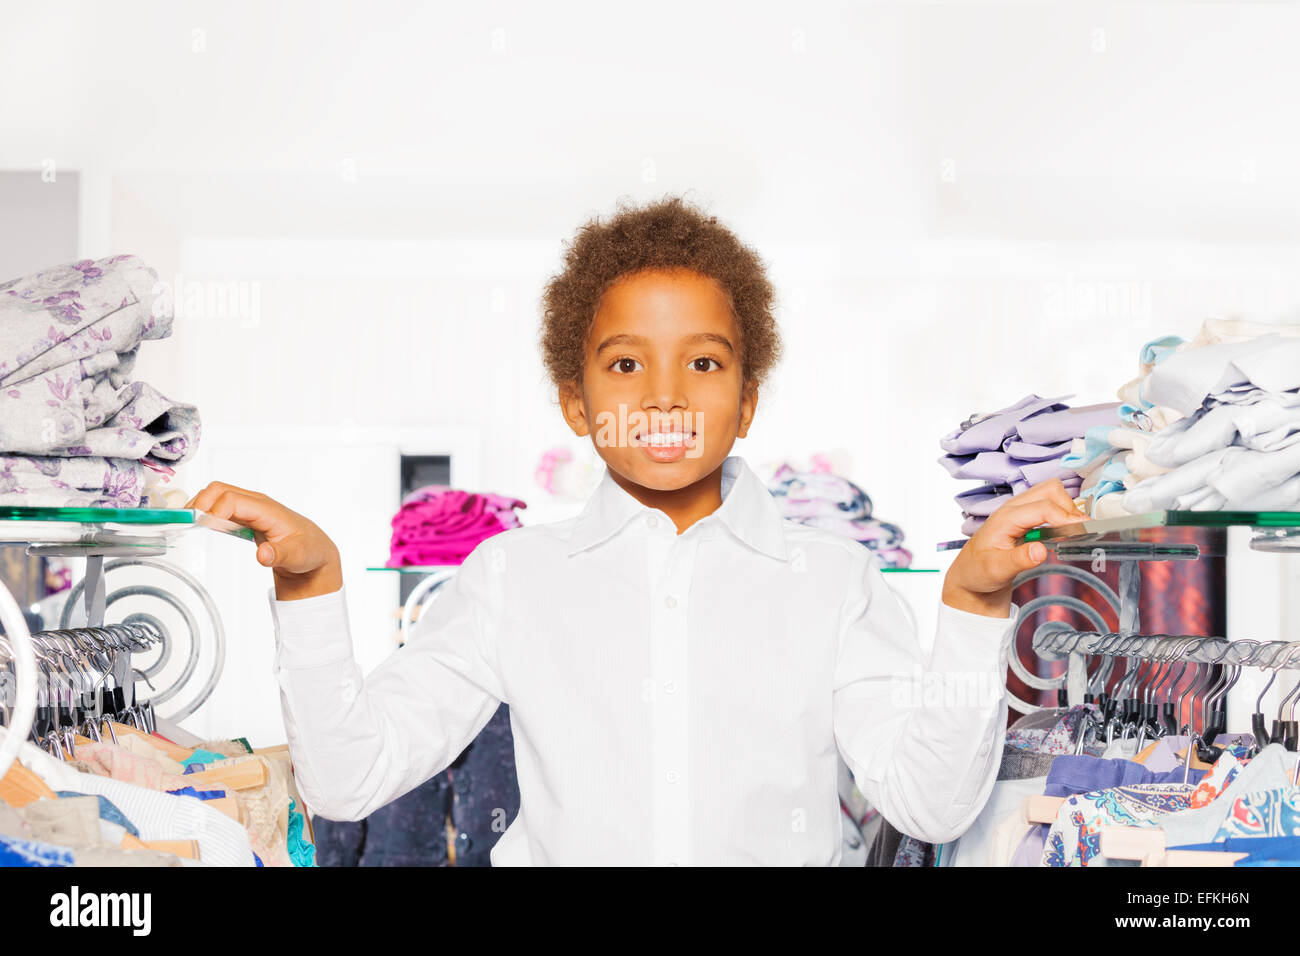 Close-up view of African boy in clothes store Stock Photo